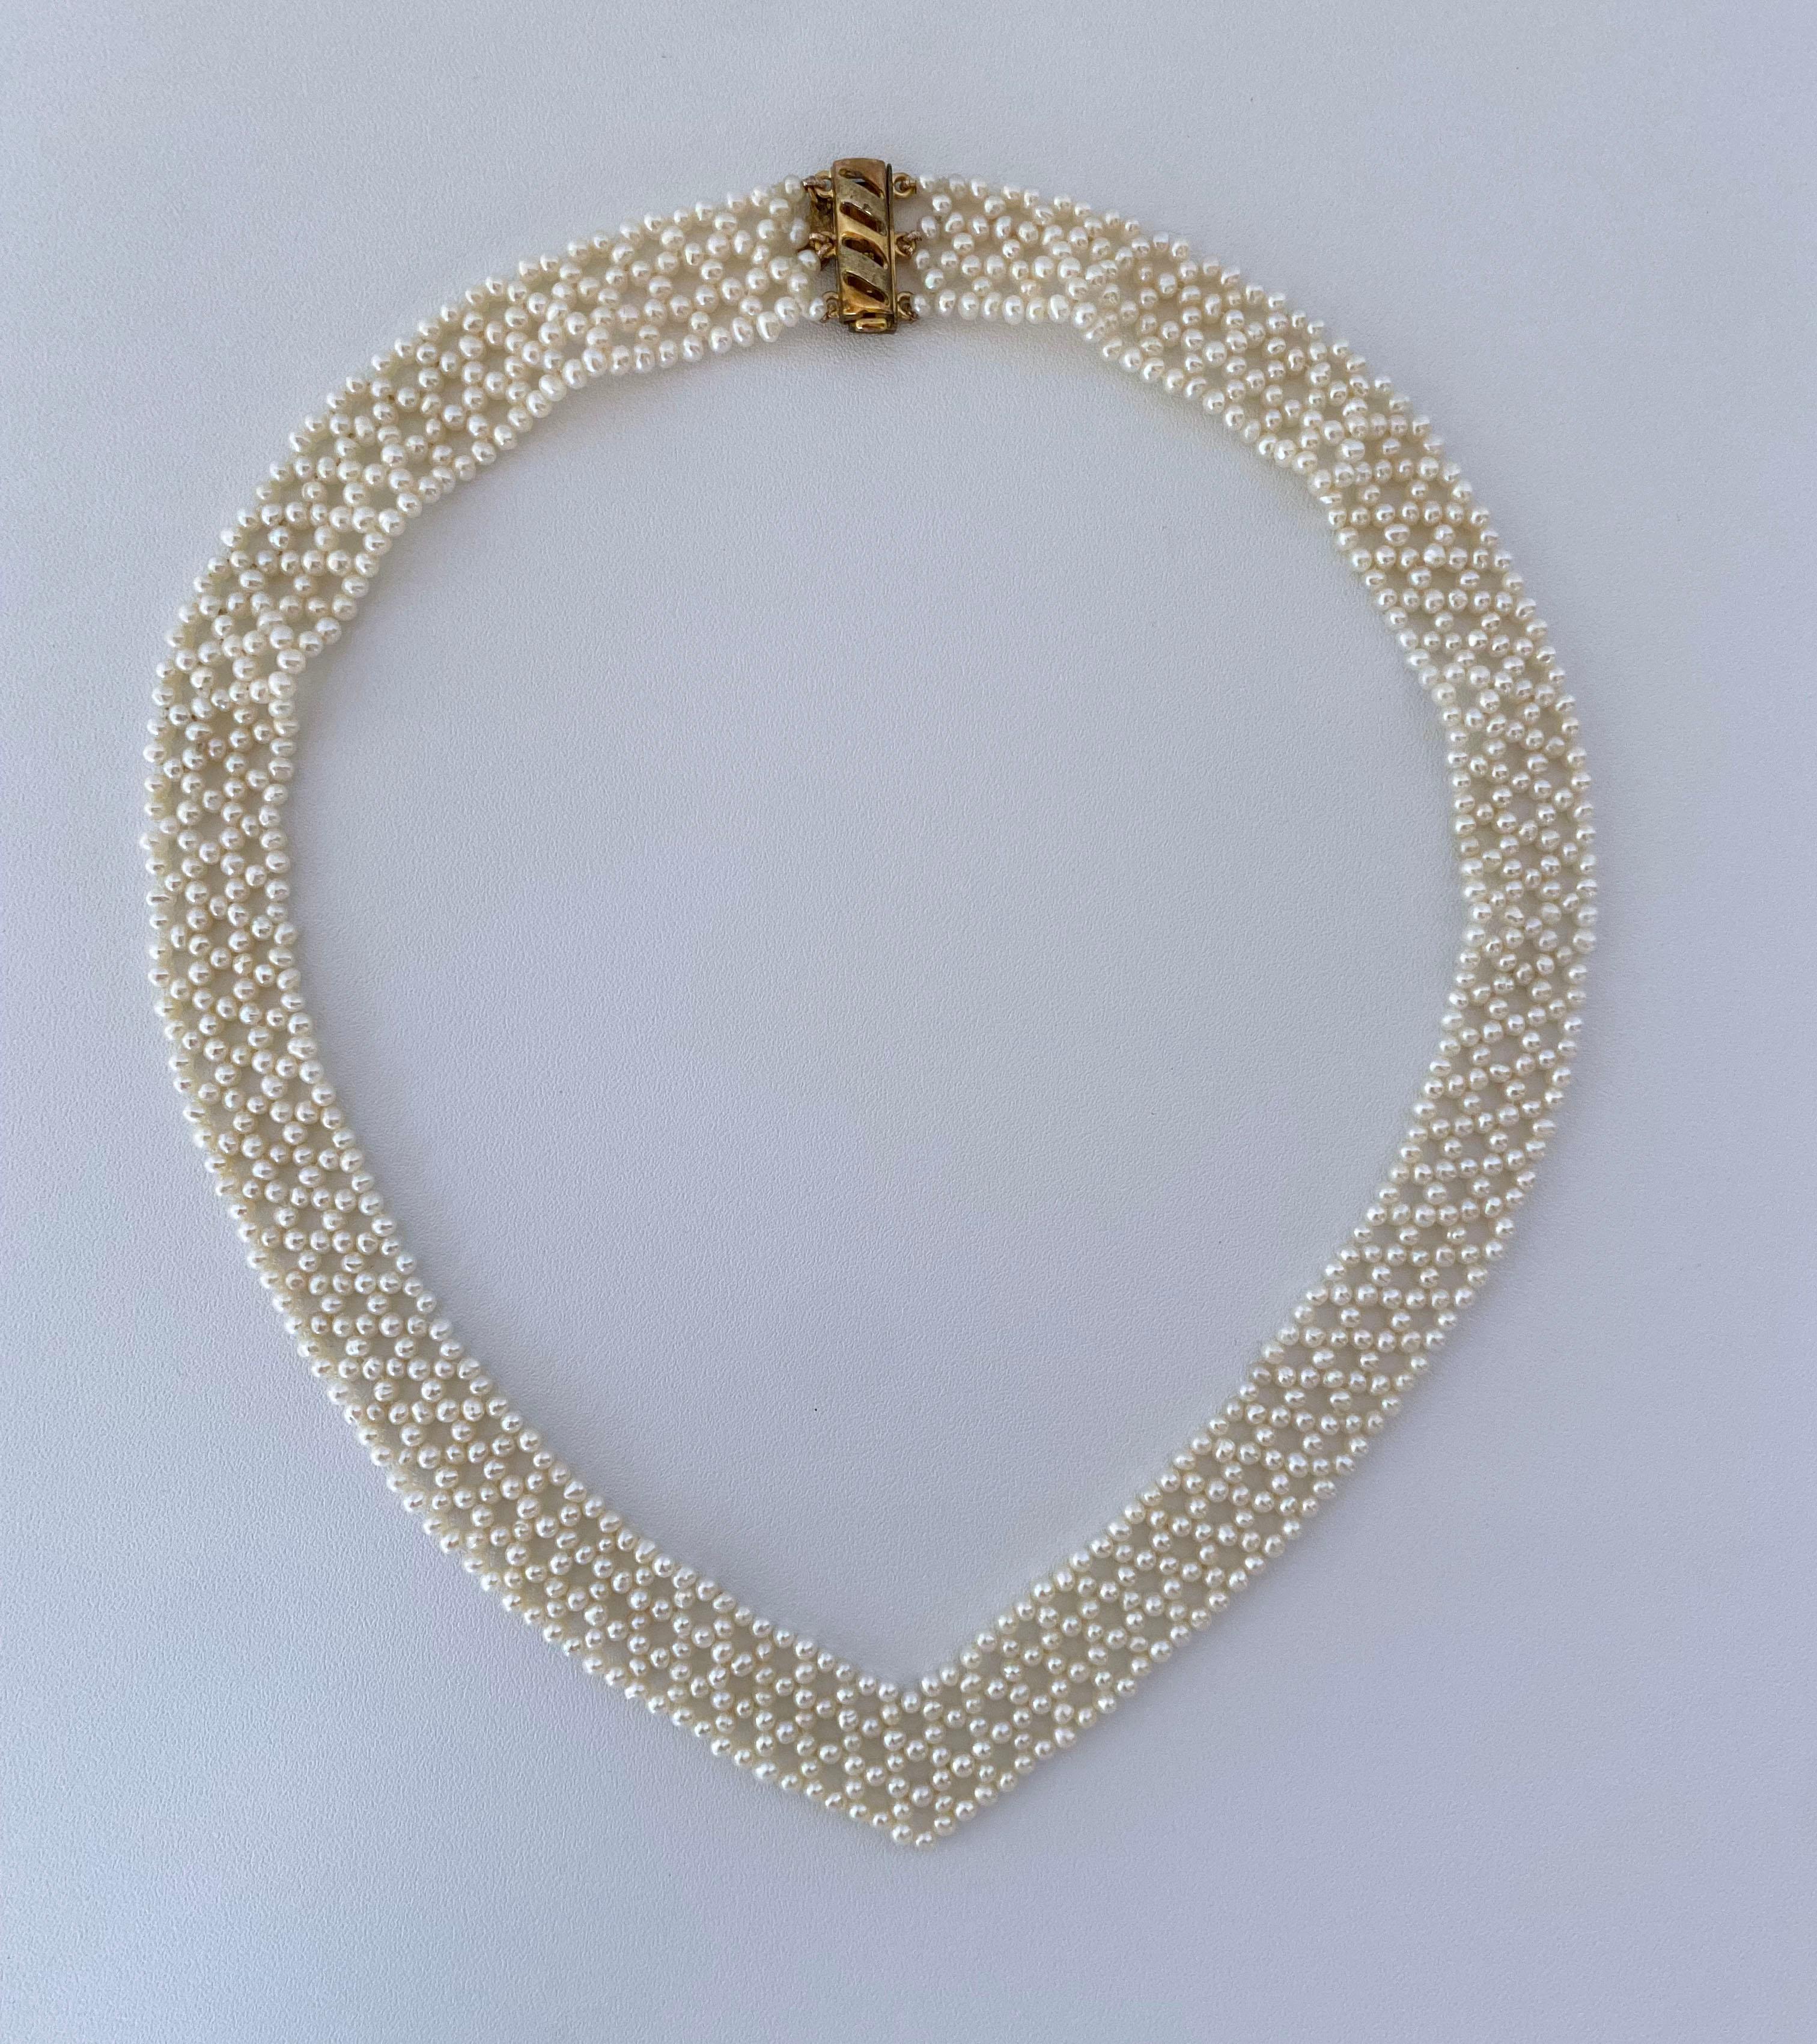 Marina J Woven 'V' Shaped Pearl Necklace with Vintage Brooch 10